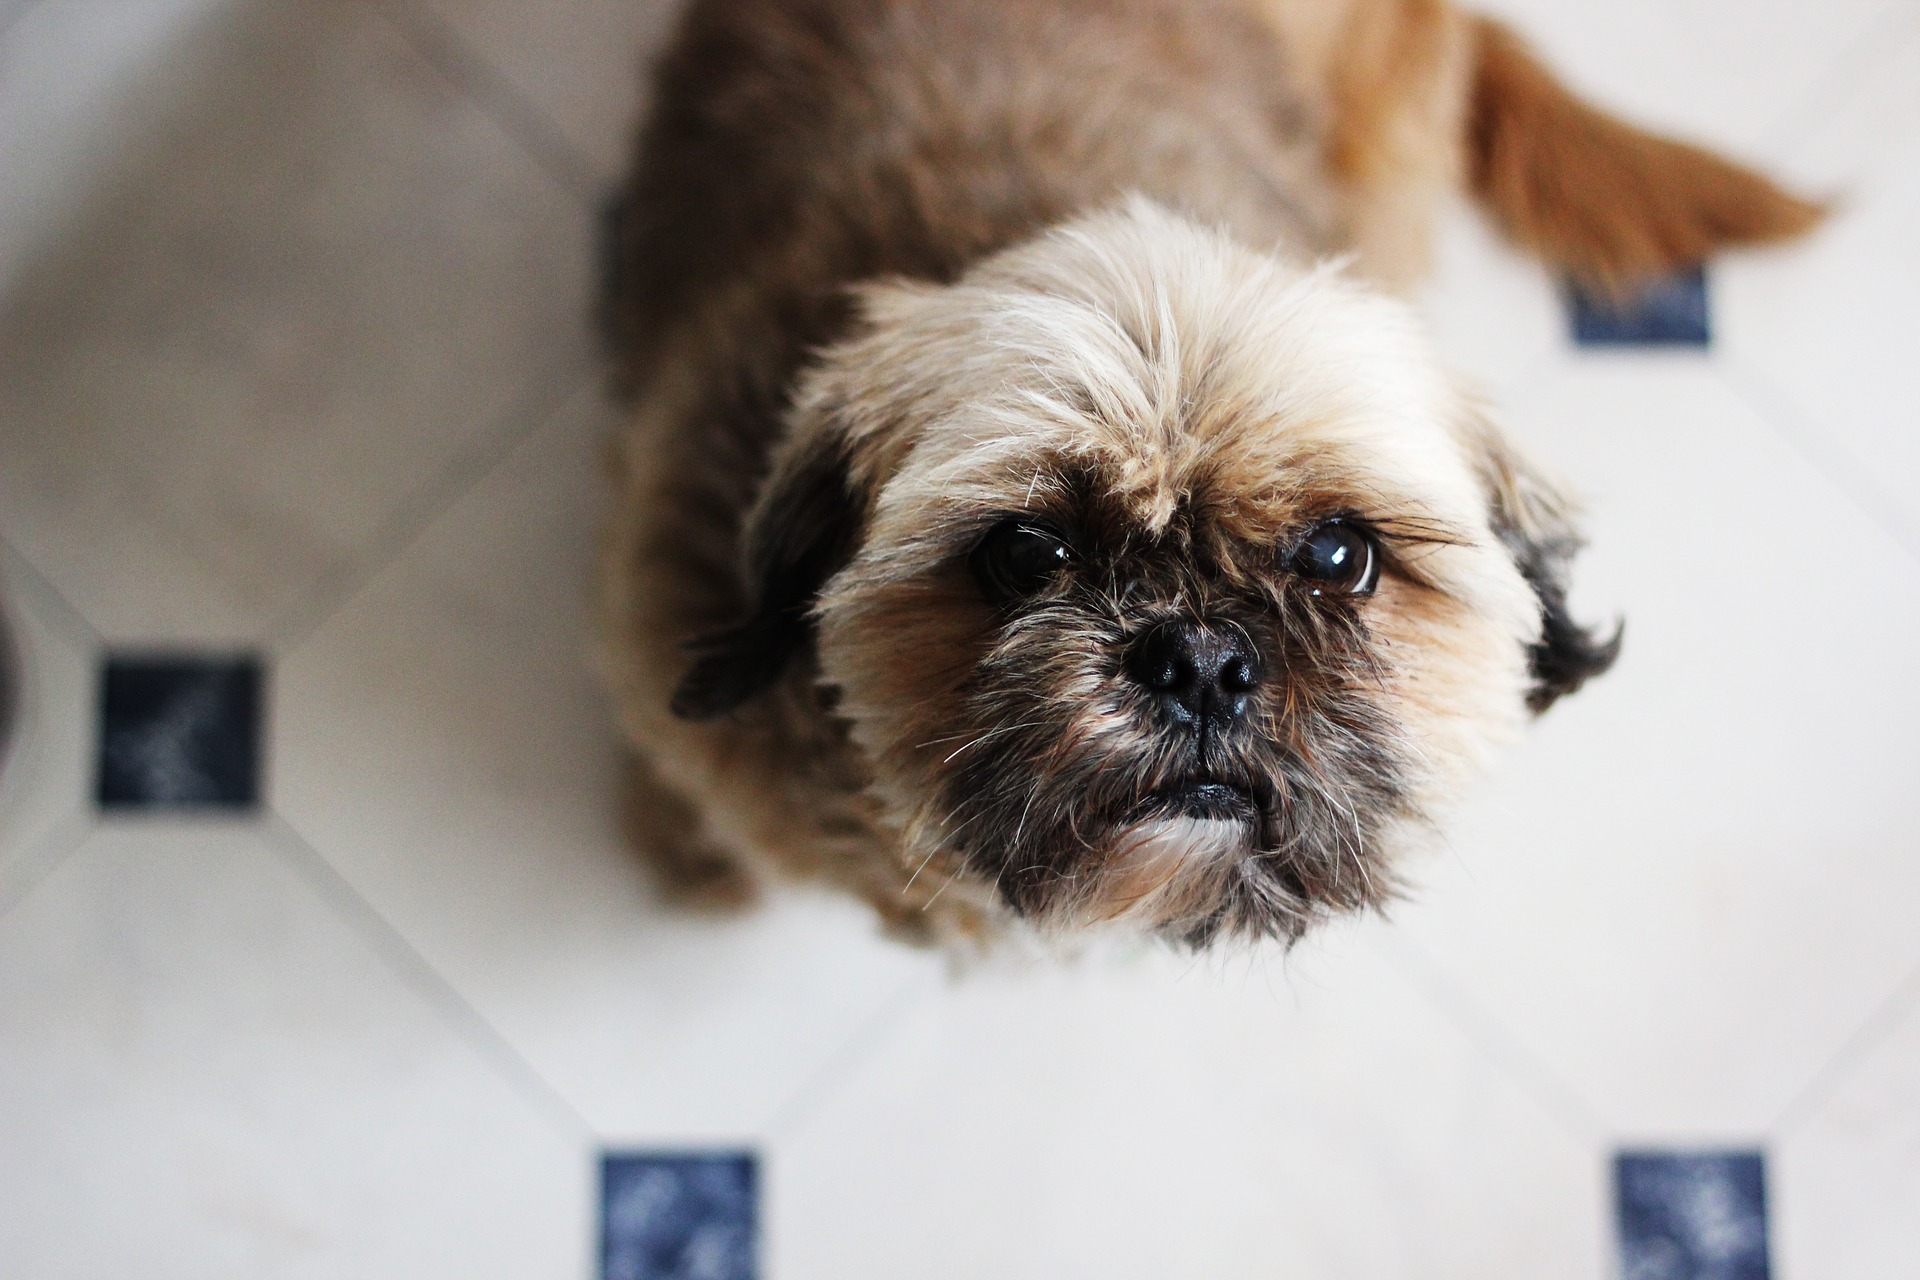 A cute and fluffy Shih Tzu looking at his owner.